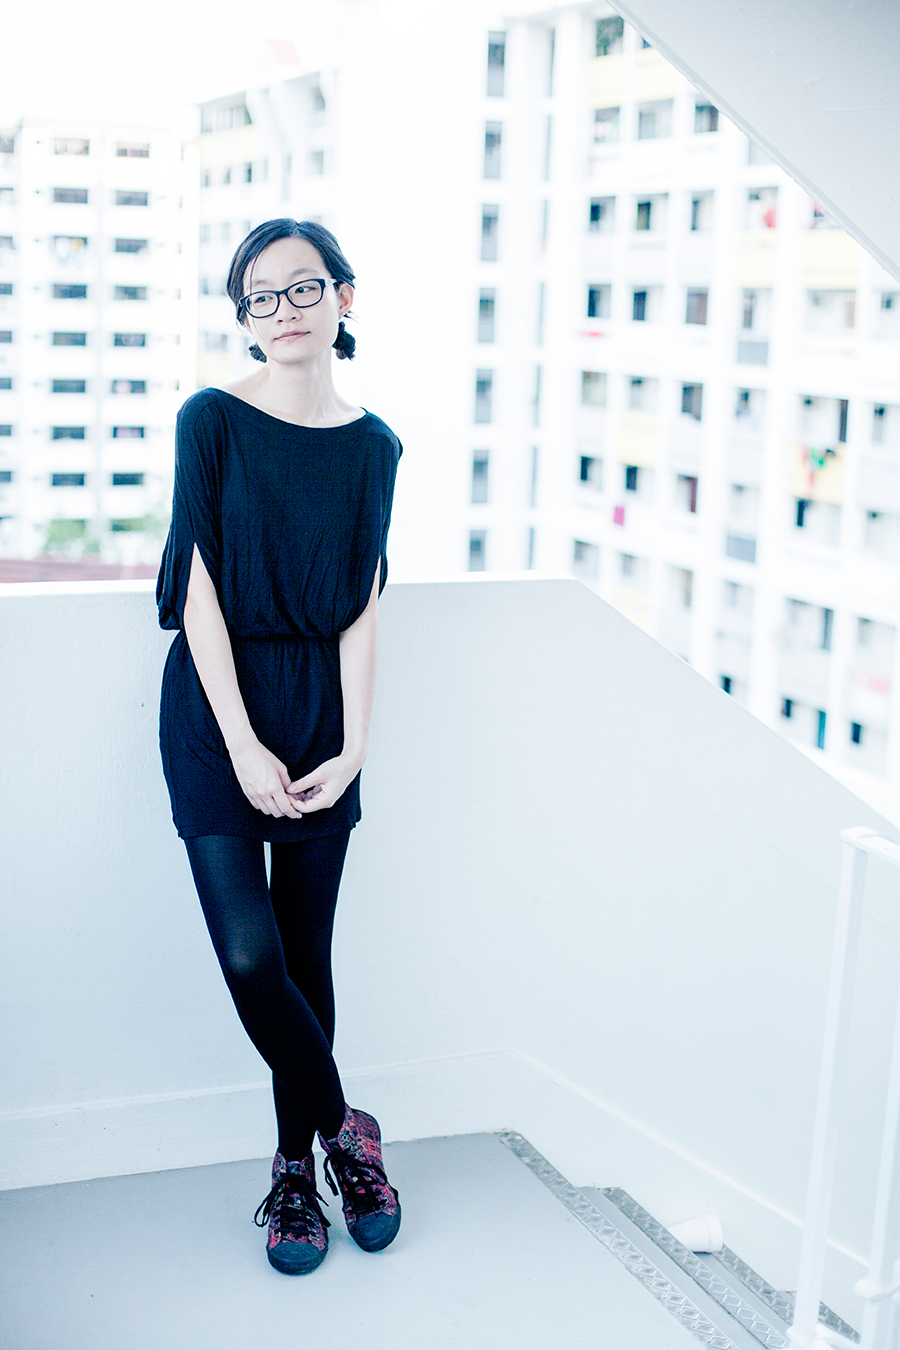 Monochroma outfit: M)phosis black tunic dress, Alexander McQueen x Puma high top sneakers, Gap black frame glasses.